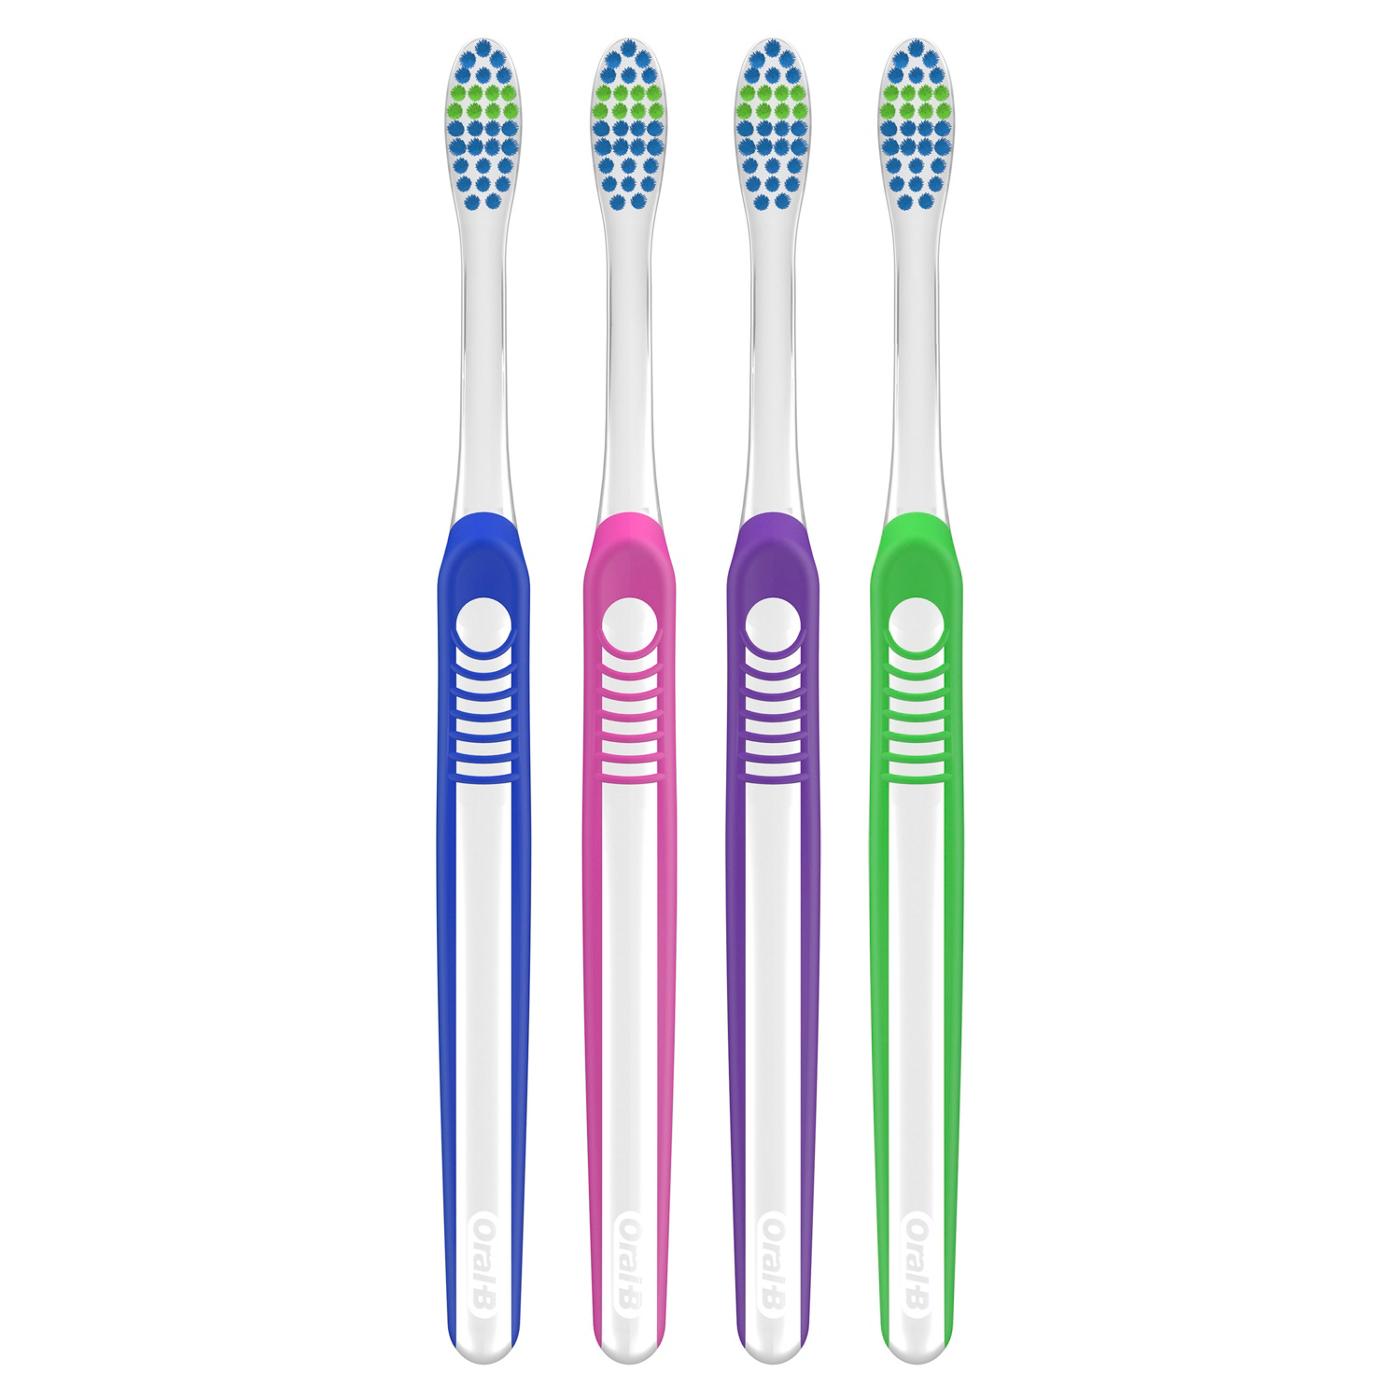 Oral-B Indicator Max Toothbrushes - Soft; image 6 of 8